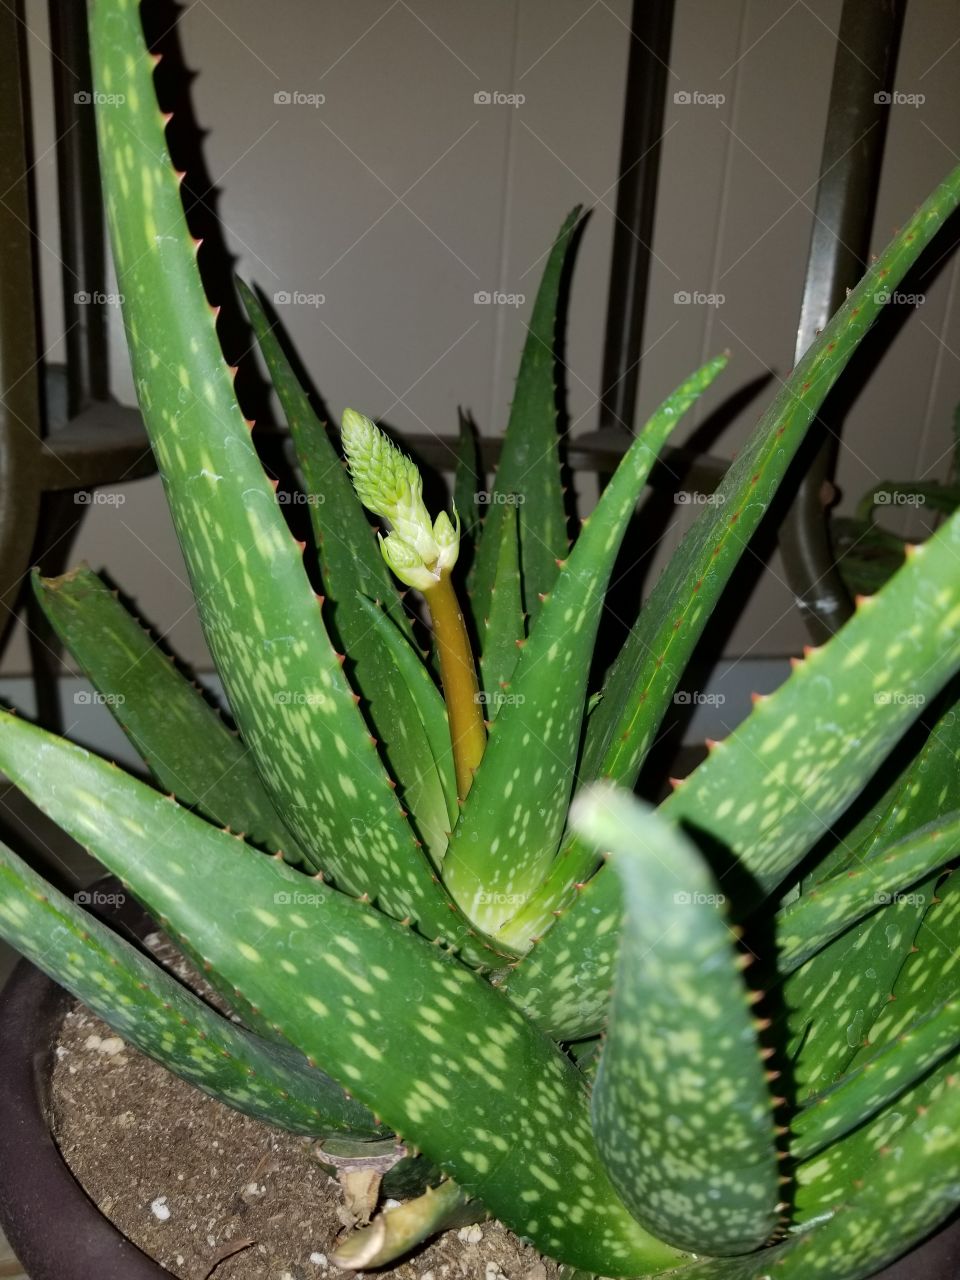 My aloe plant is going to Bloom